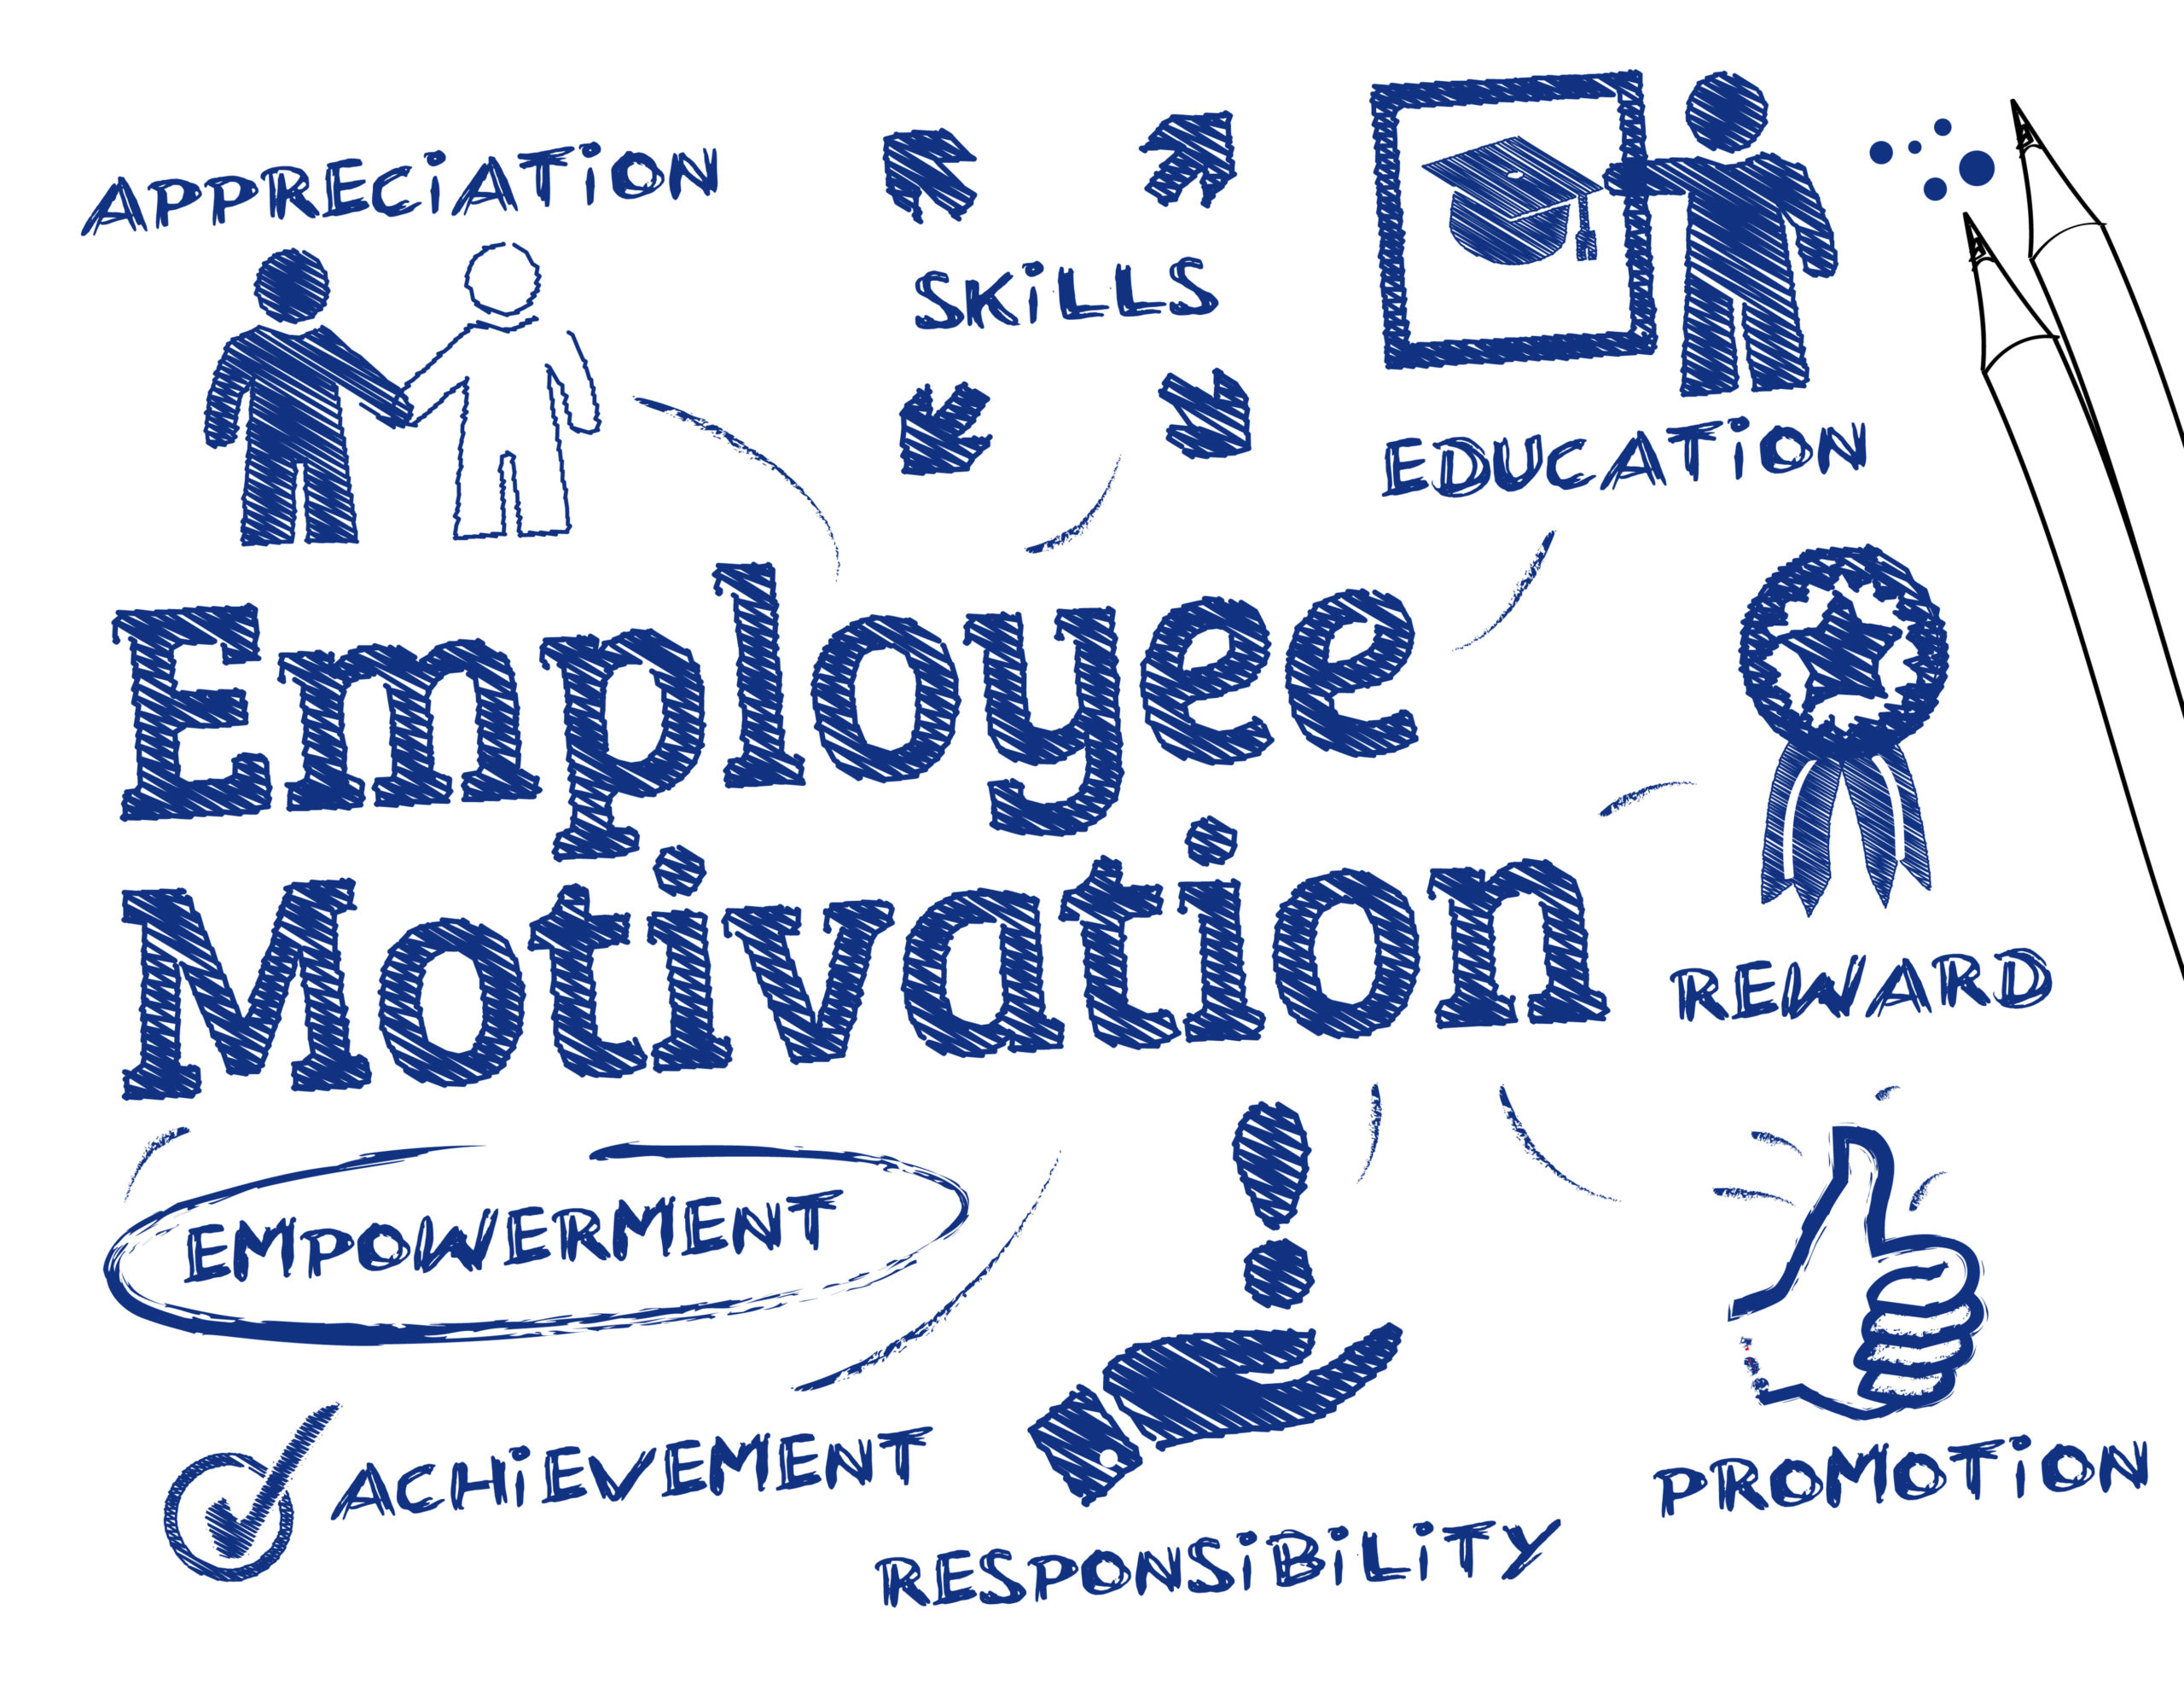 research objectives of employee motivation